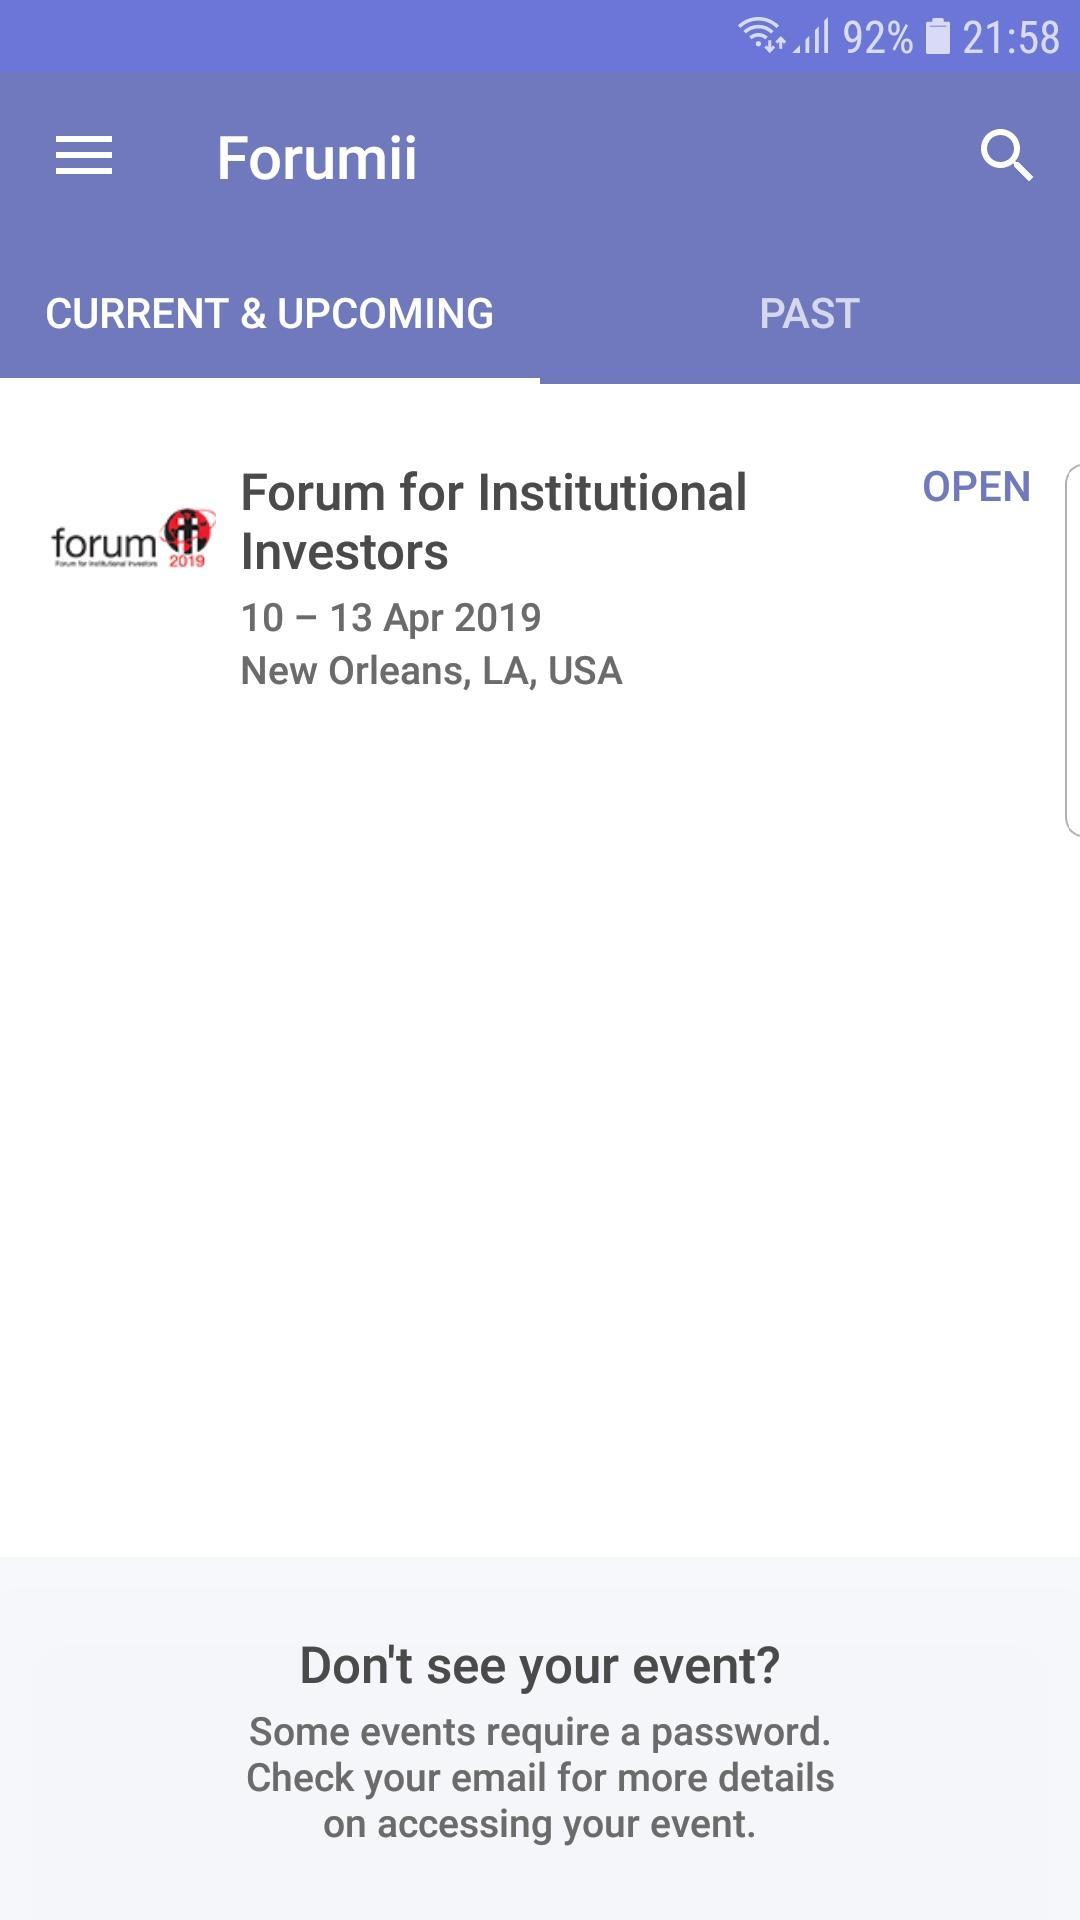 Institutional Investor Forum for Android - APK Download